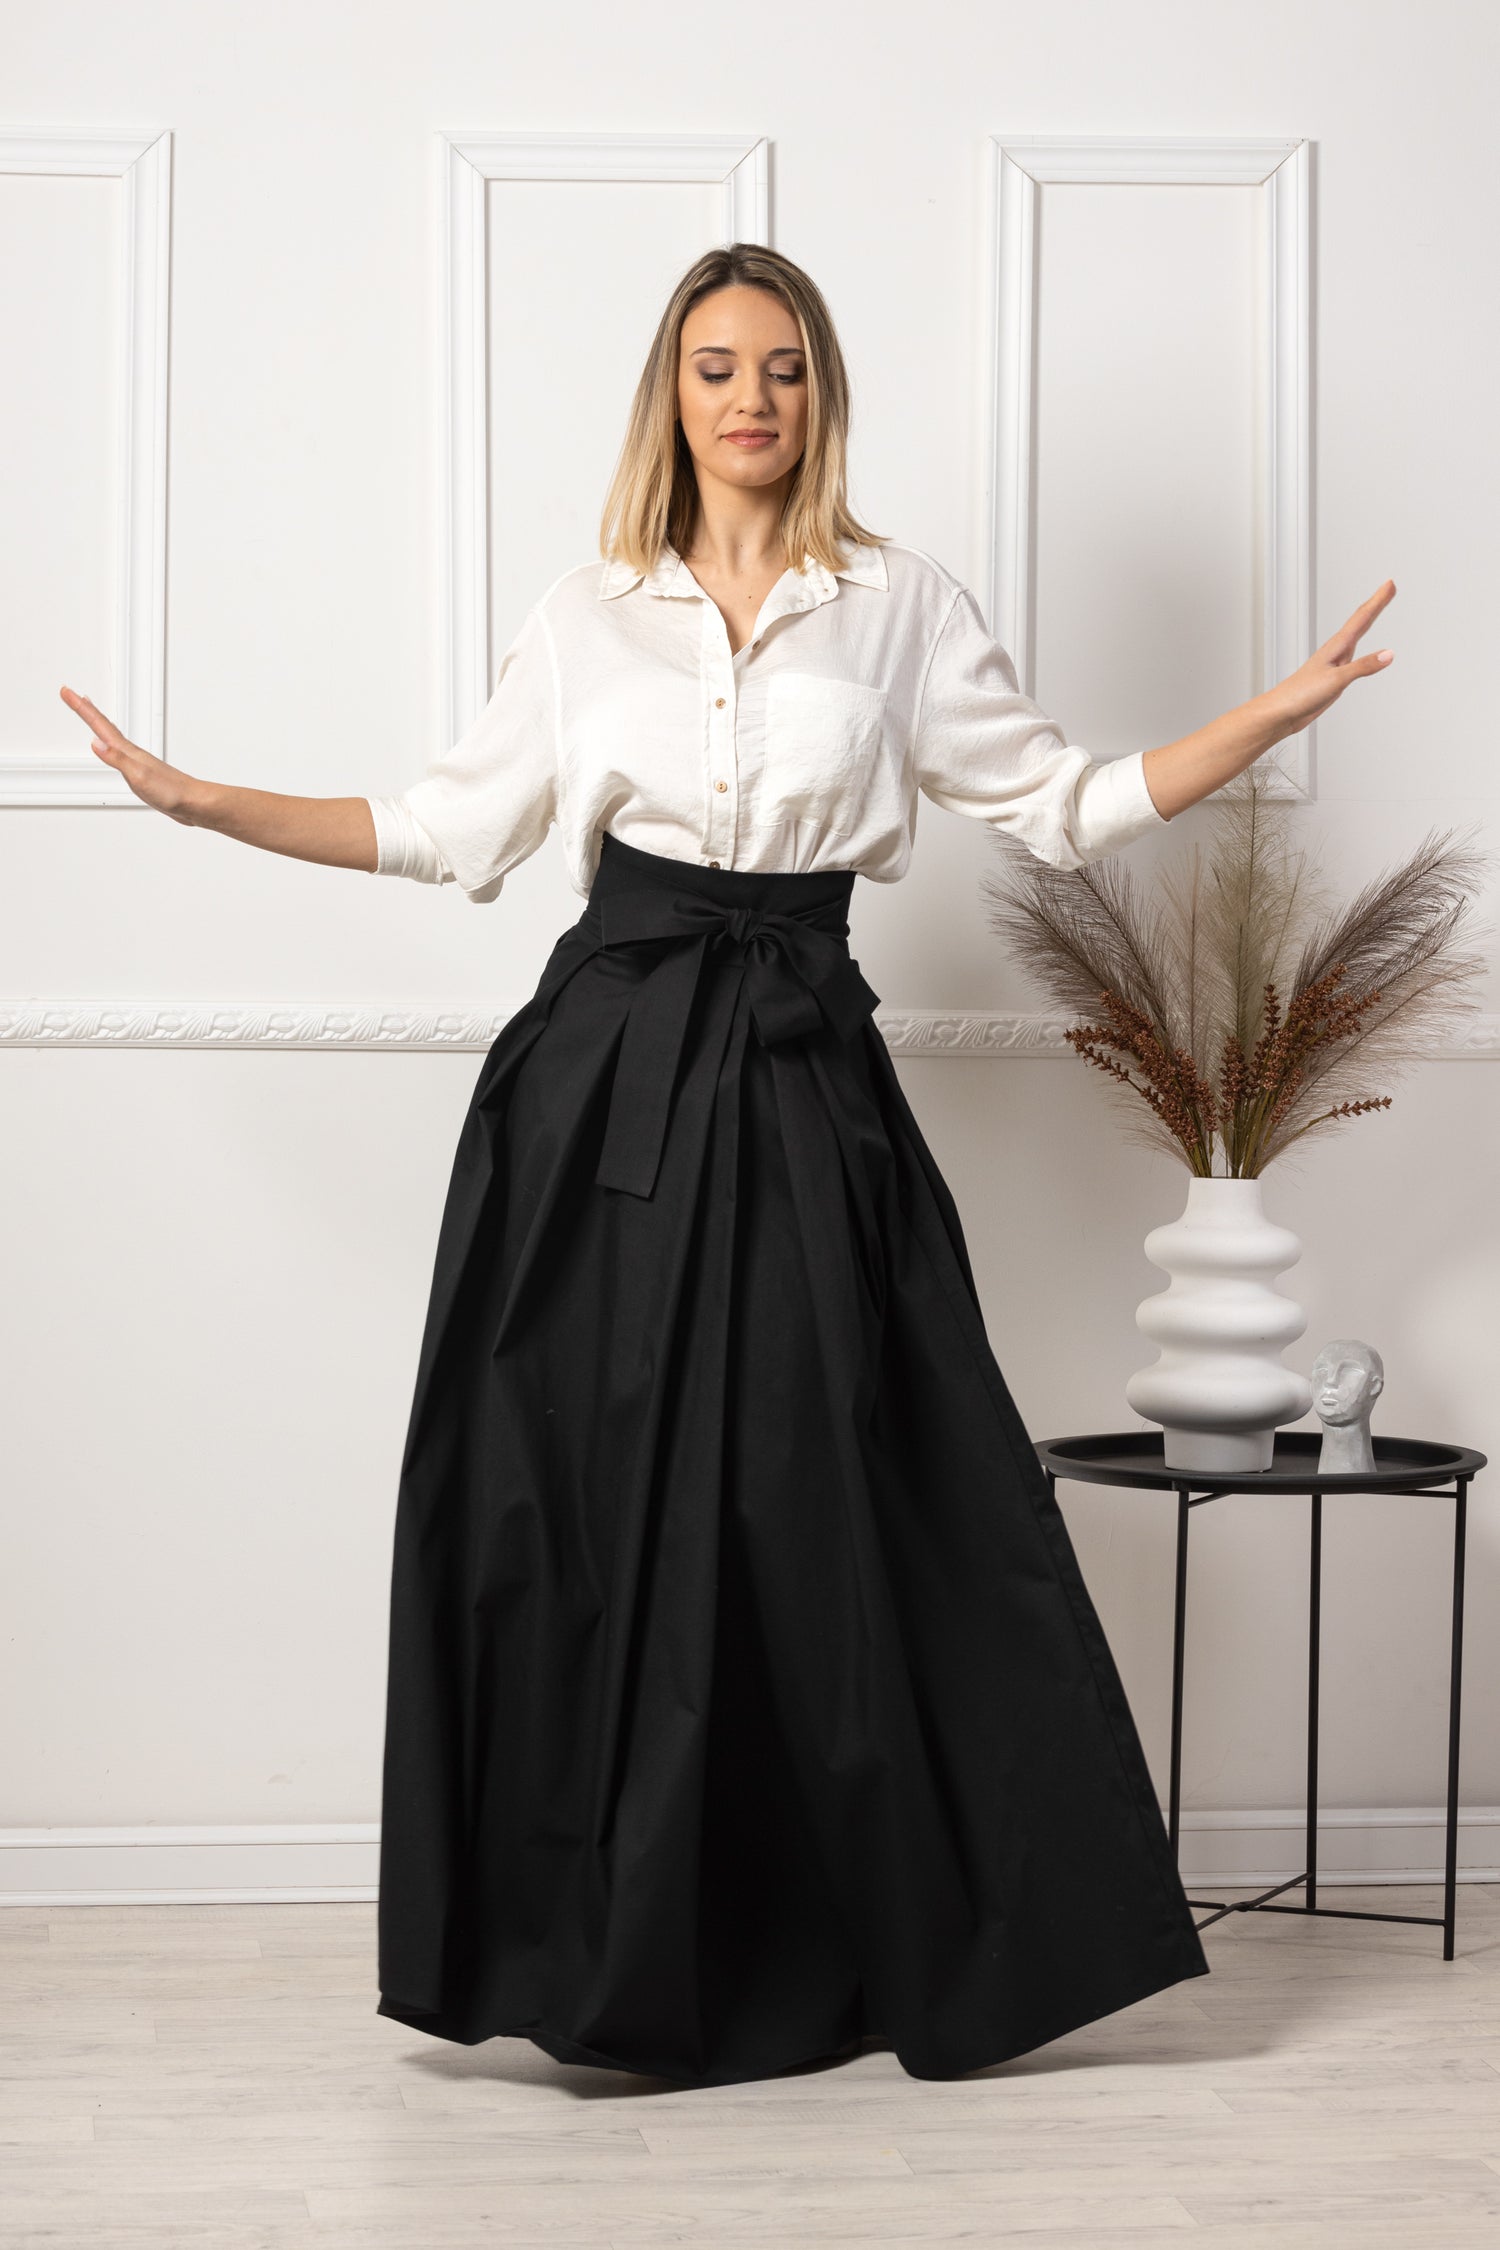 Skirts PADEGAO Navy High Waist Pleated Long Skirt Solid A Line Women Autumn  Winter Black Plus Size Boho Casual Party Maxi Long Skirts From W7o9, $23.74  | DHgate.Com